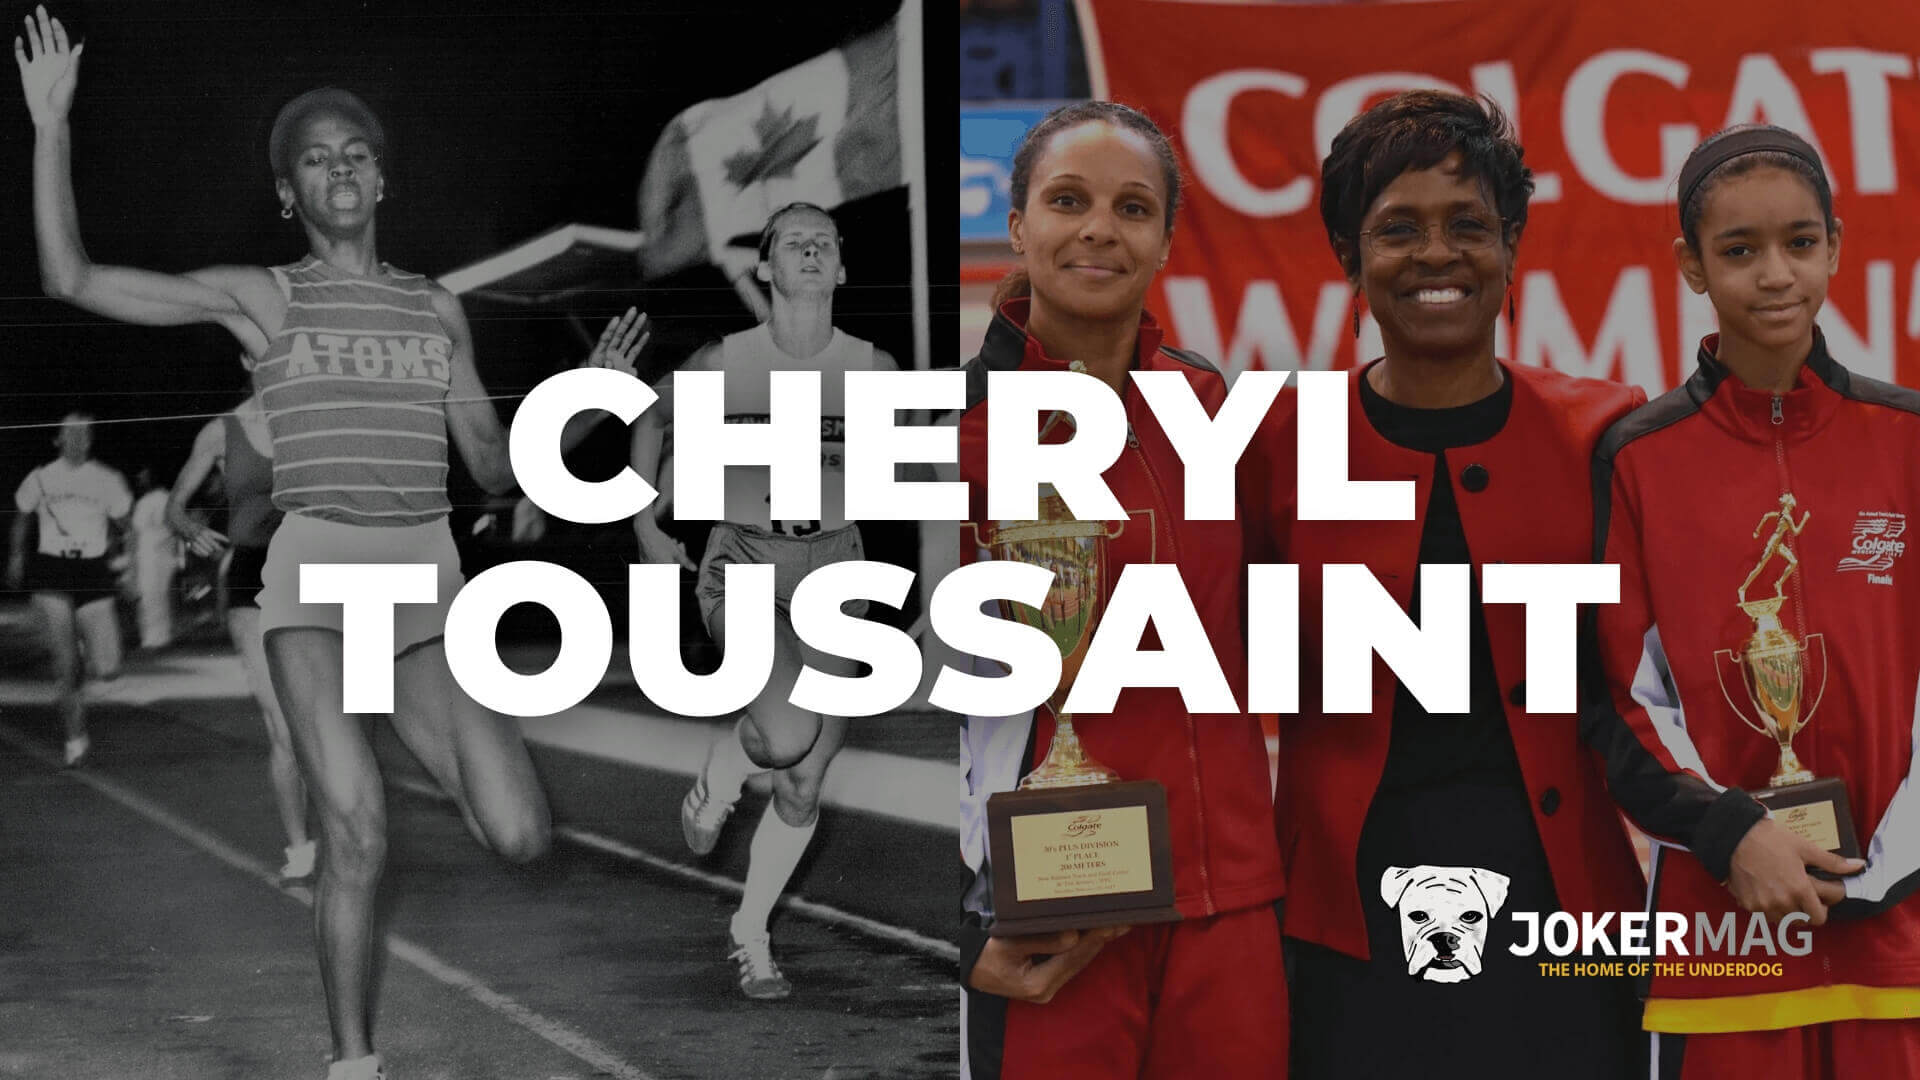 Olympic silver medalist Cheryl Toussaint speaks to Joker Mag about the Colgate Women's Games